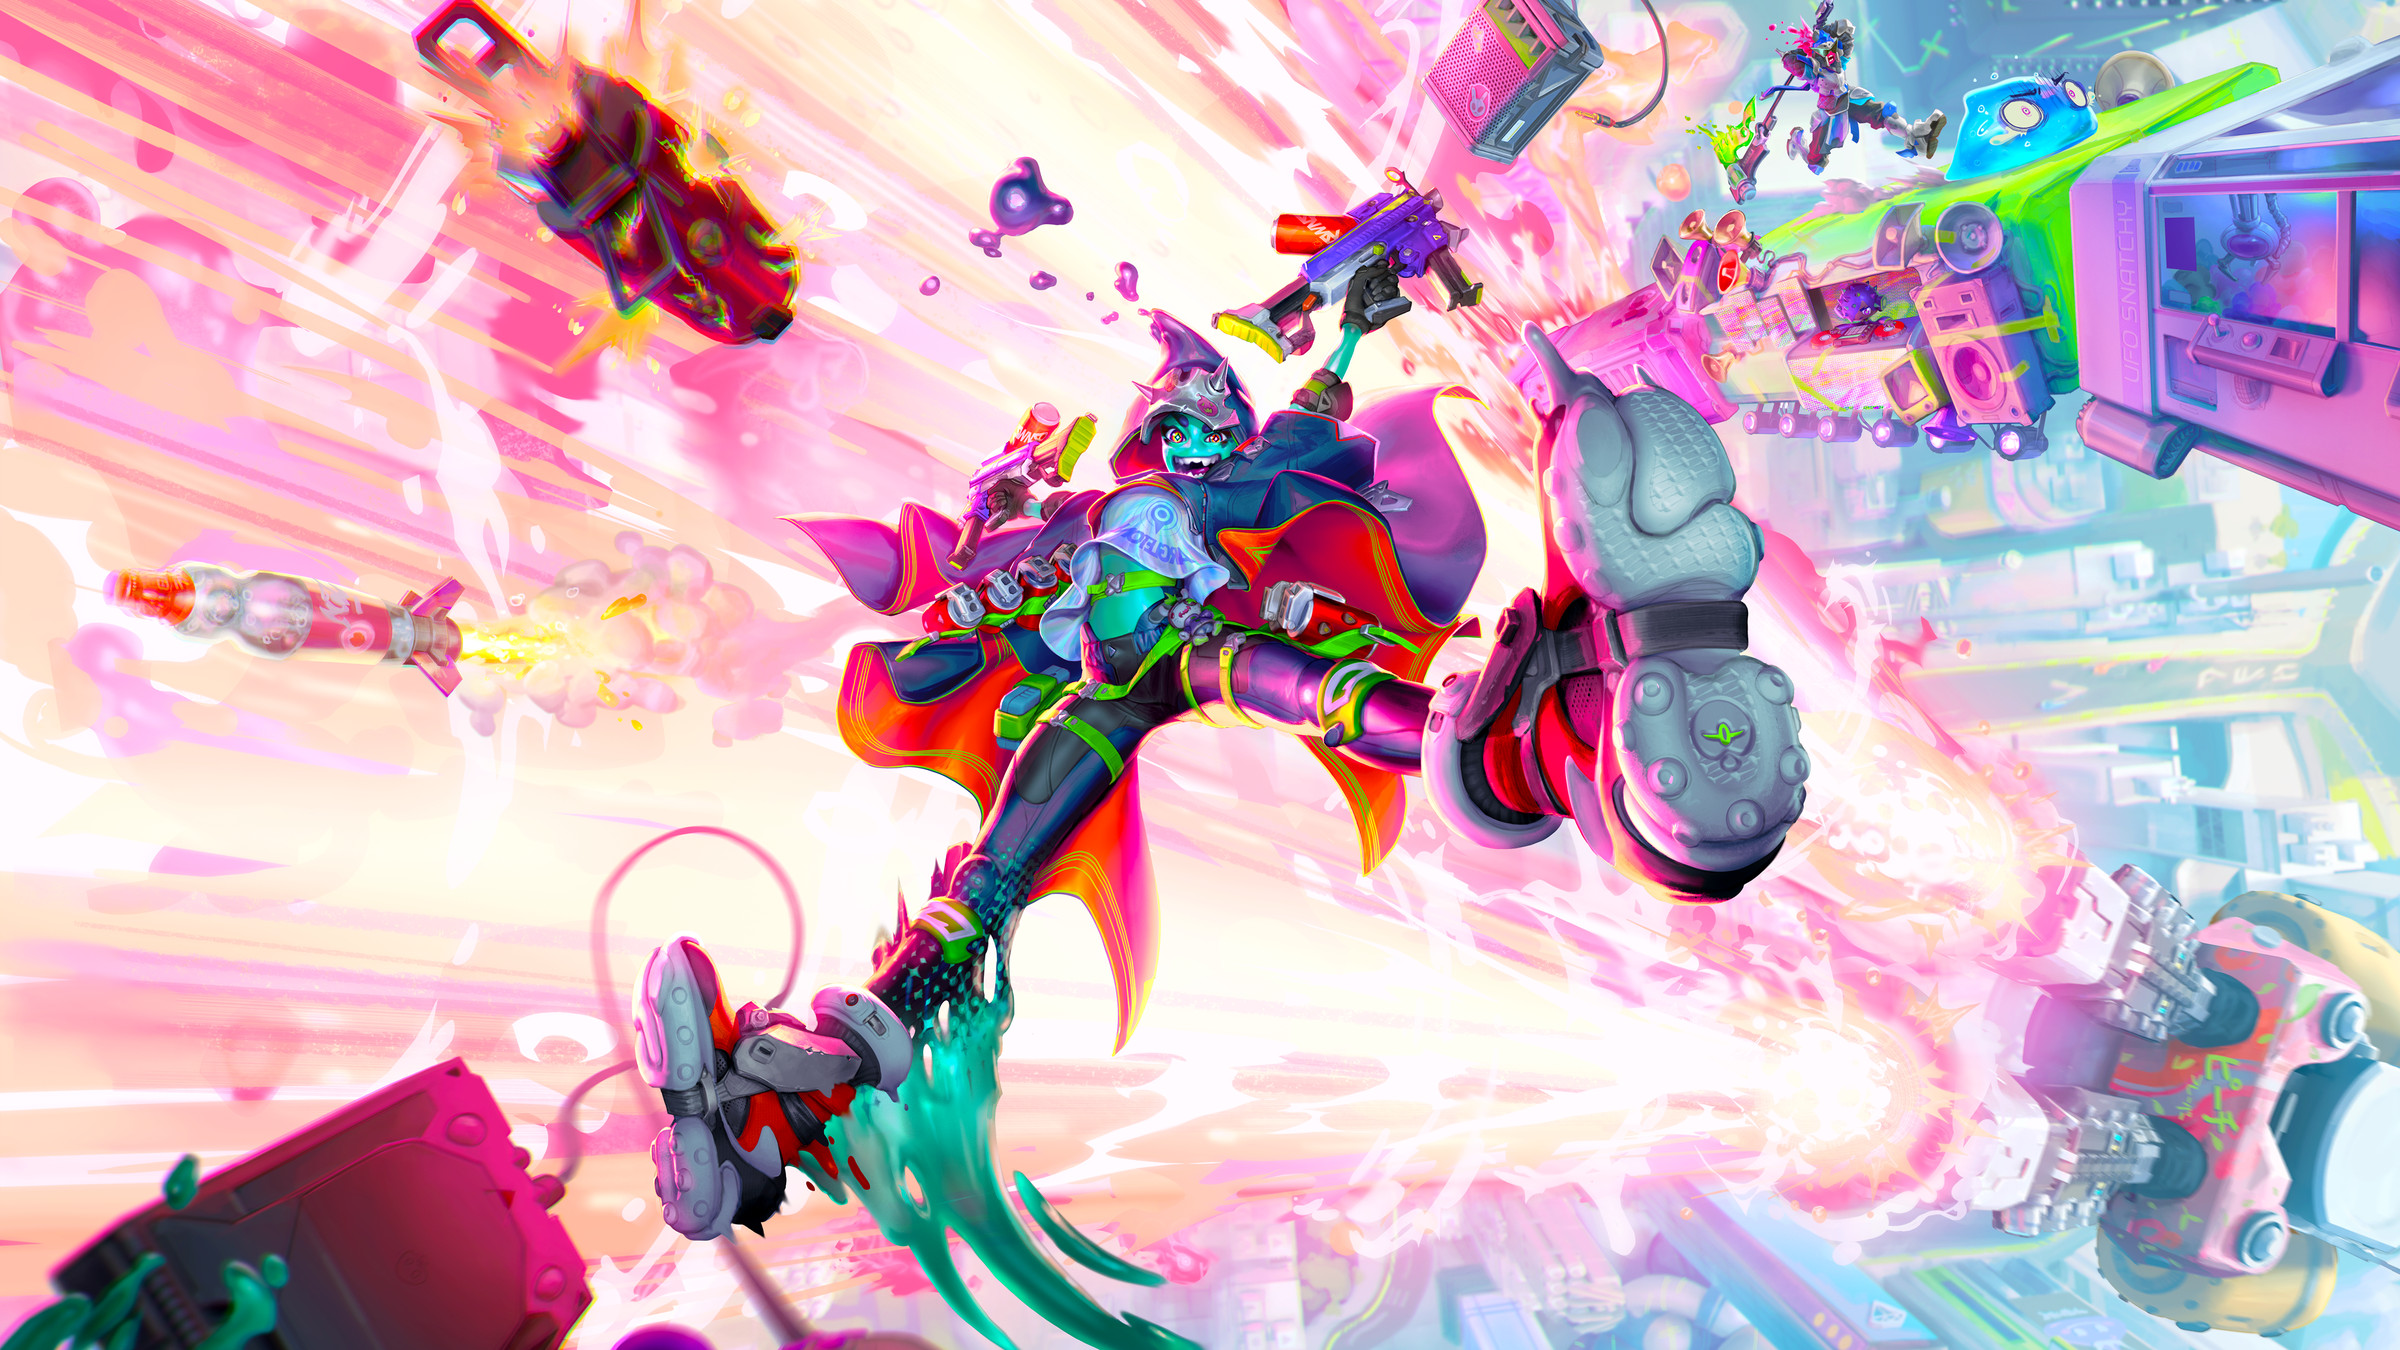 A colorful character splash art as part of the announcement of game studio Genpop Interactive.